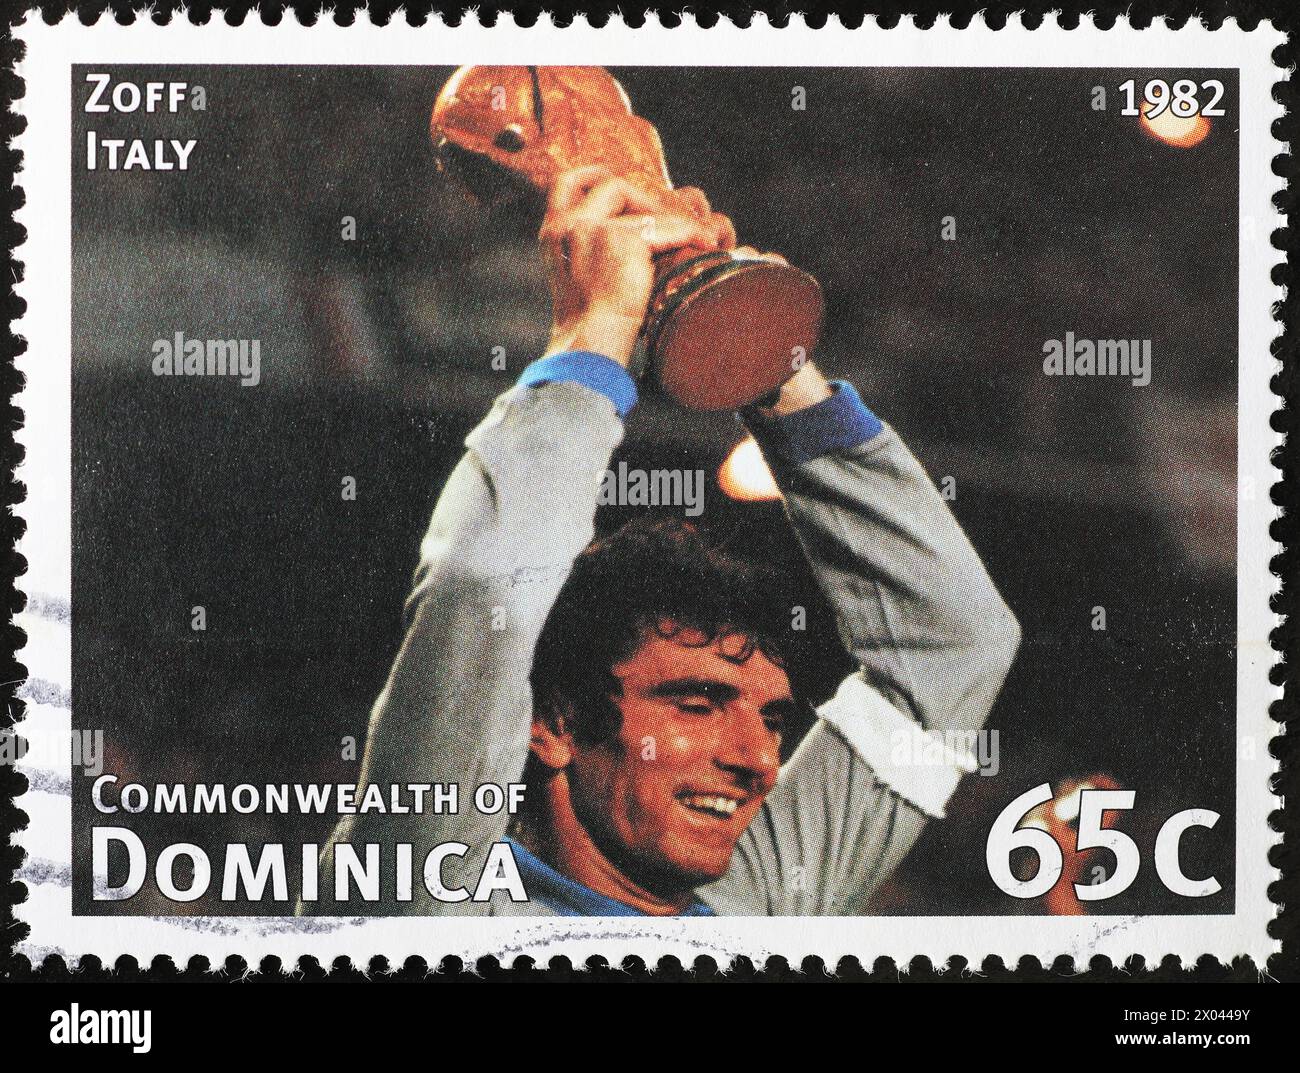 Dino Zoff with the World Cup of 1982 on stamp Stock Photo